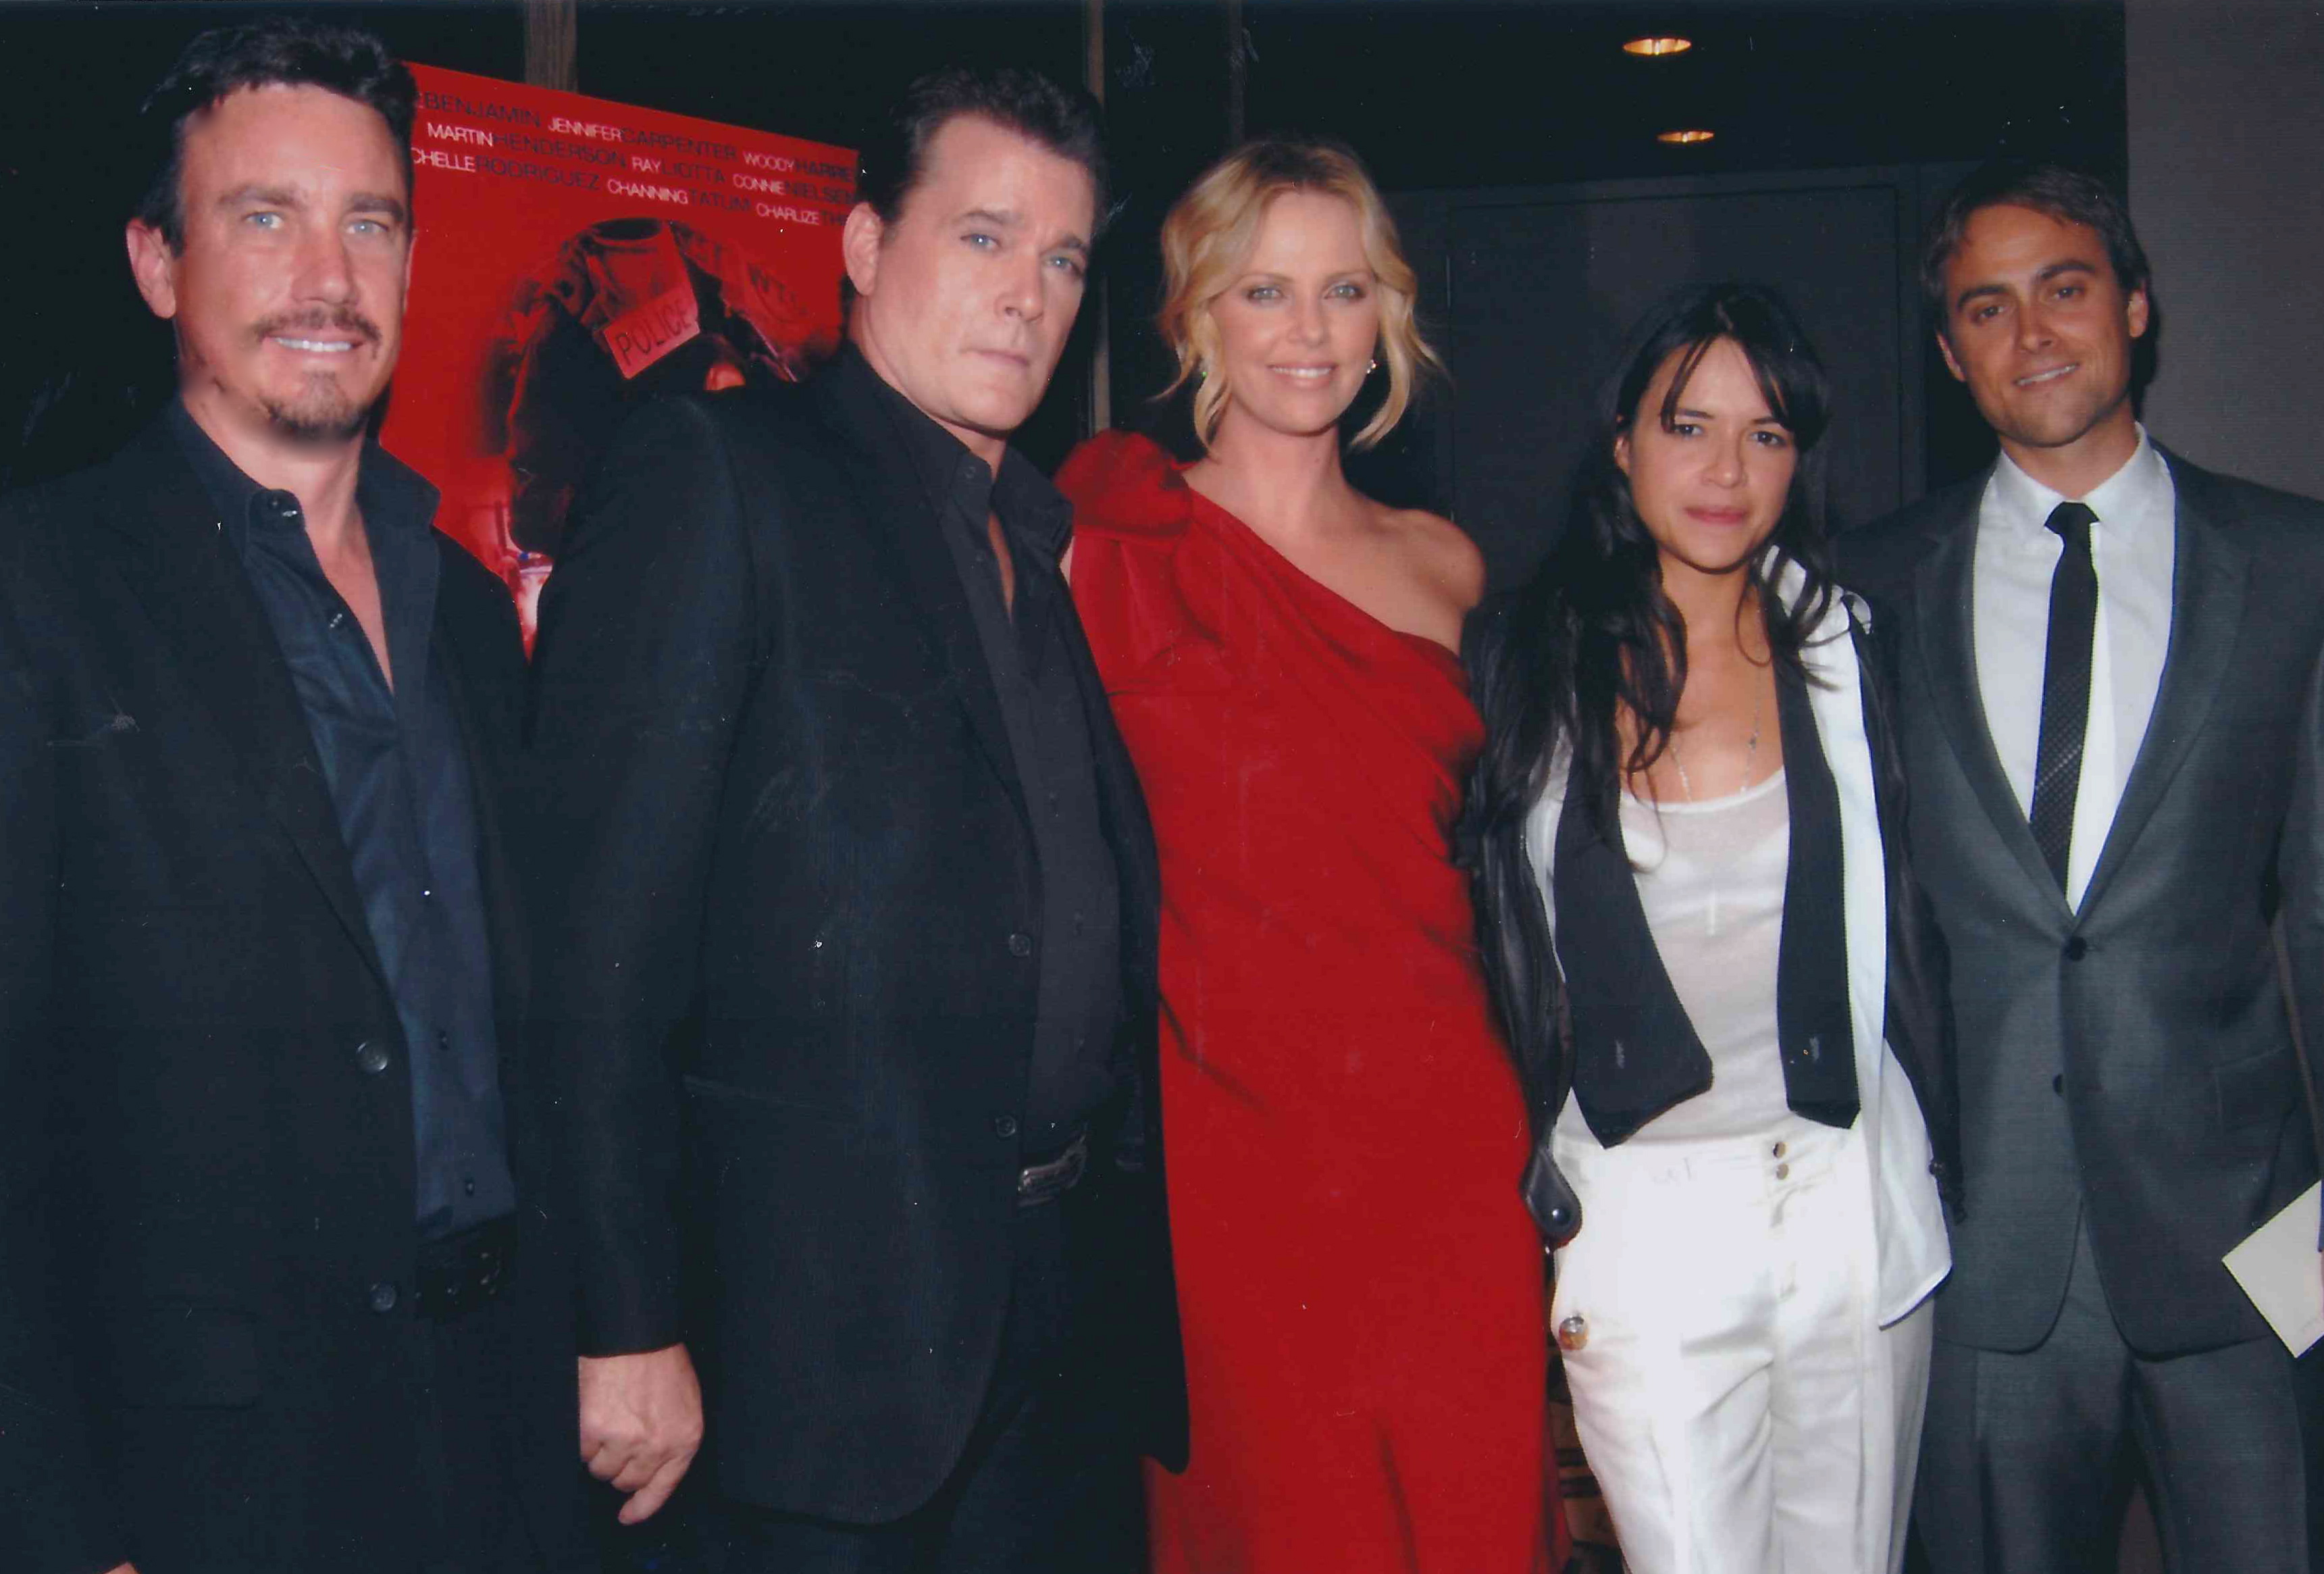 The Cinema Society / Dior Beauty NYC premier with Battle in Seattle stars Ray Liotta, Charlize Theron, Michelle Rodriguez and director Stuart Townsend